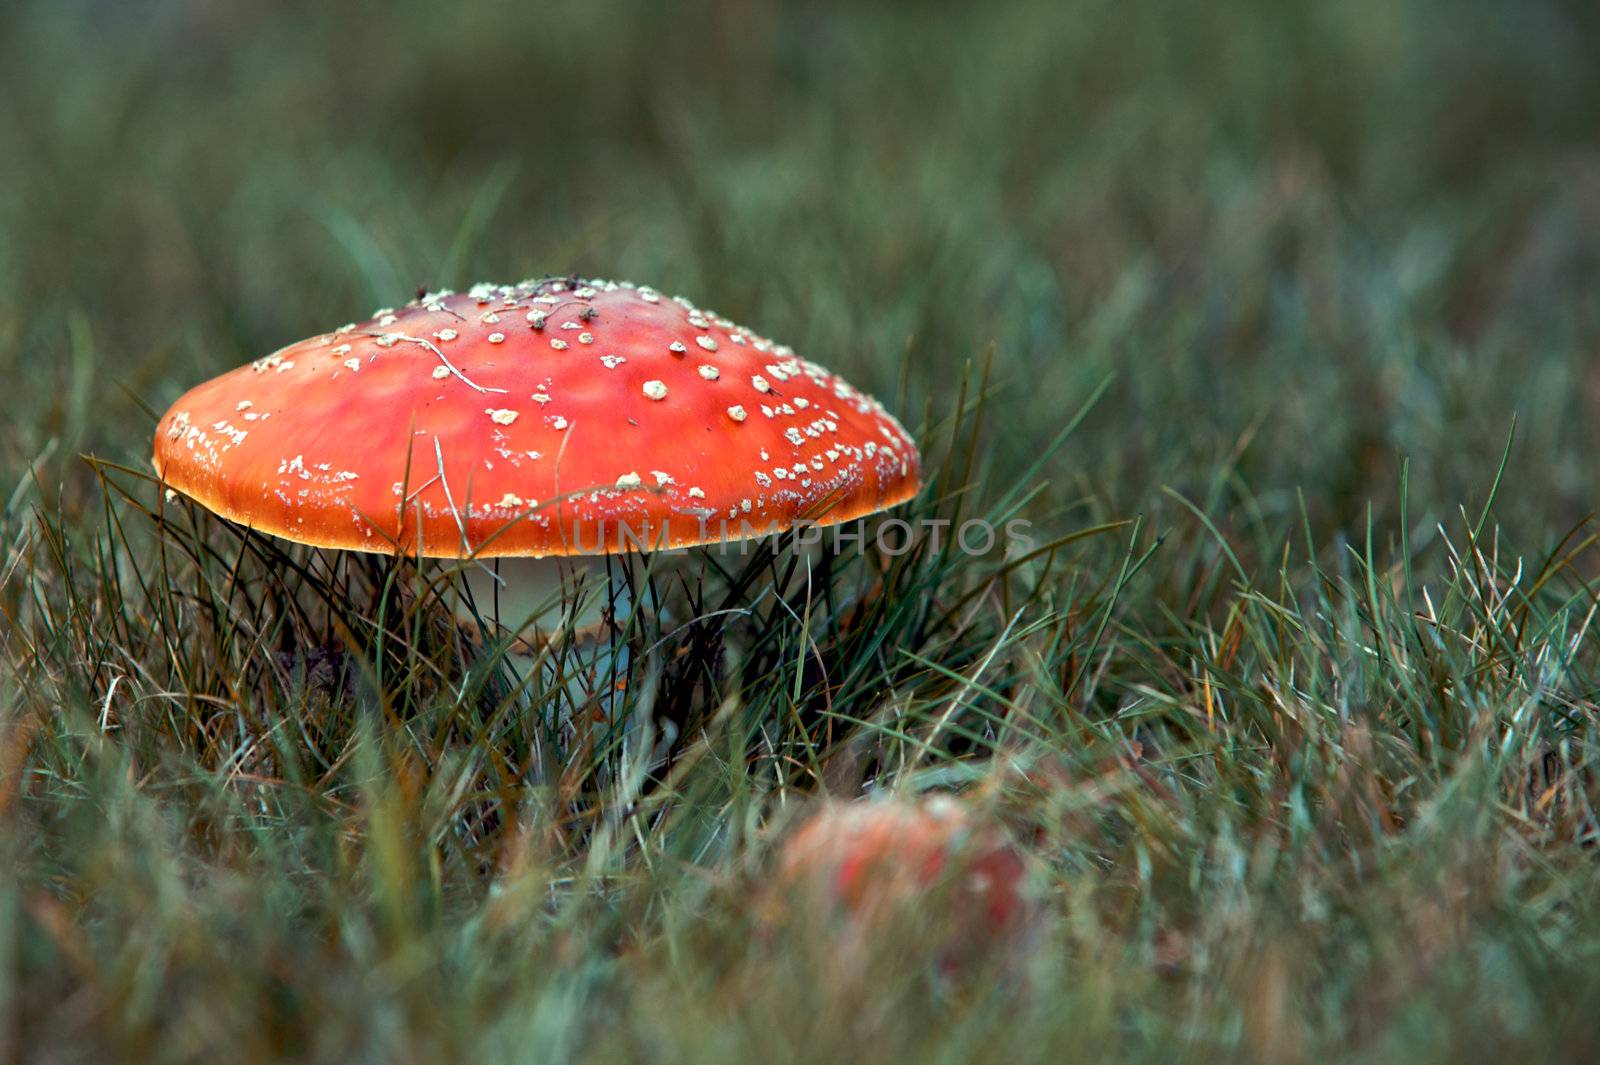 Spotted red mushroom in a Forrest